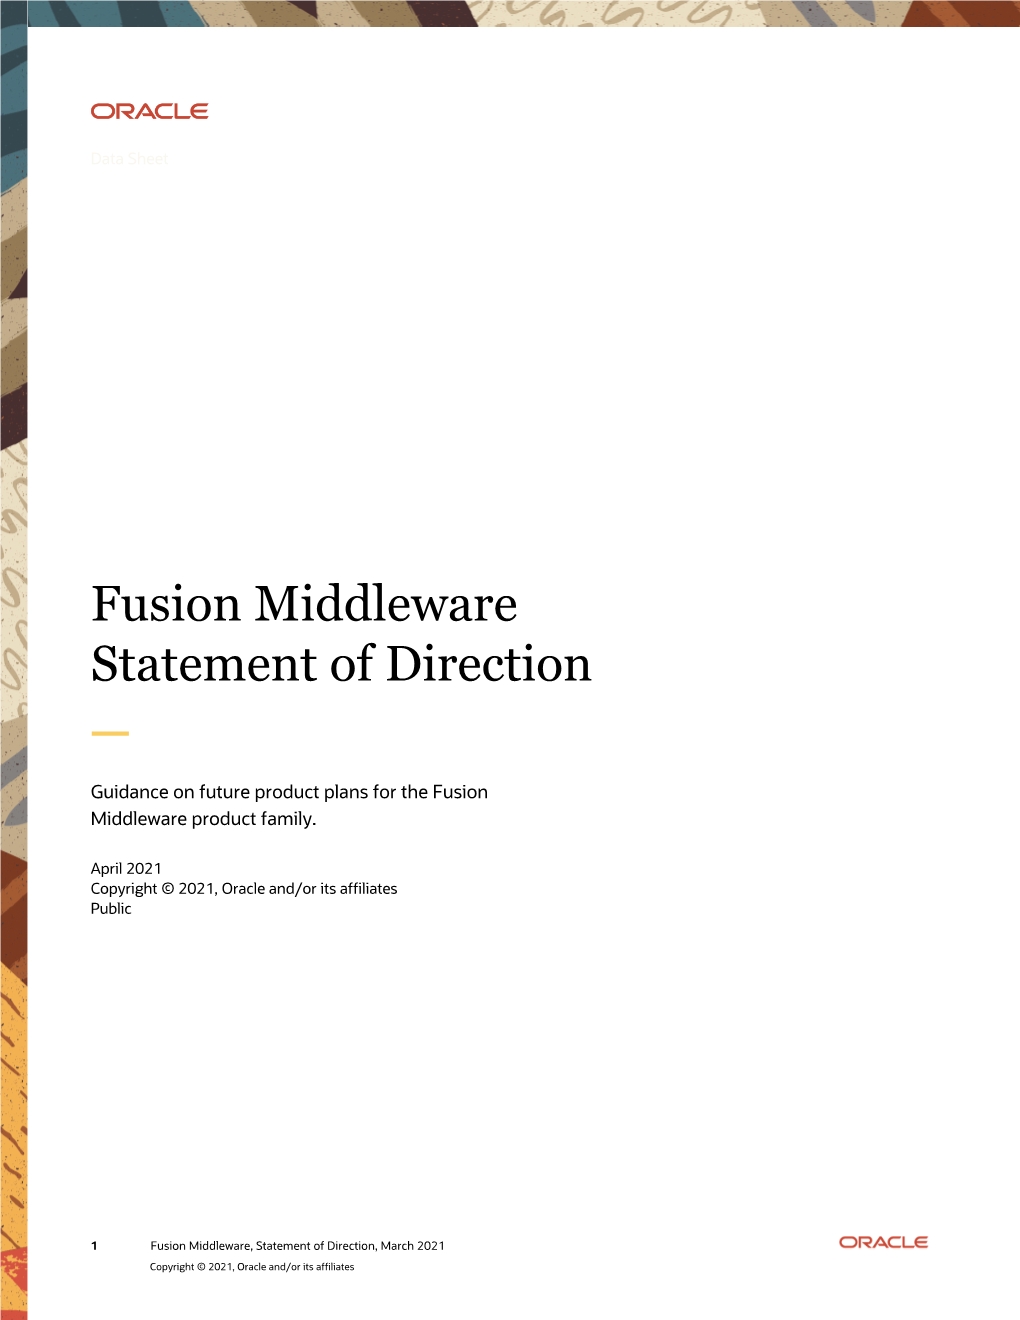 Oracle Fusion Middleware Statement of Direction